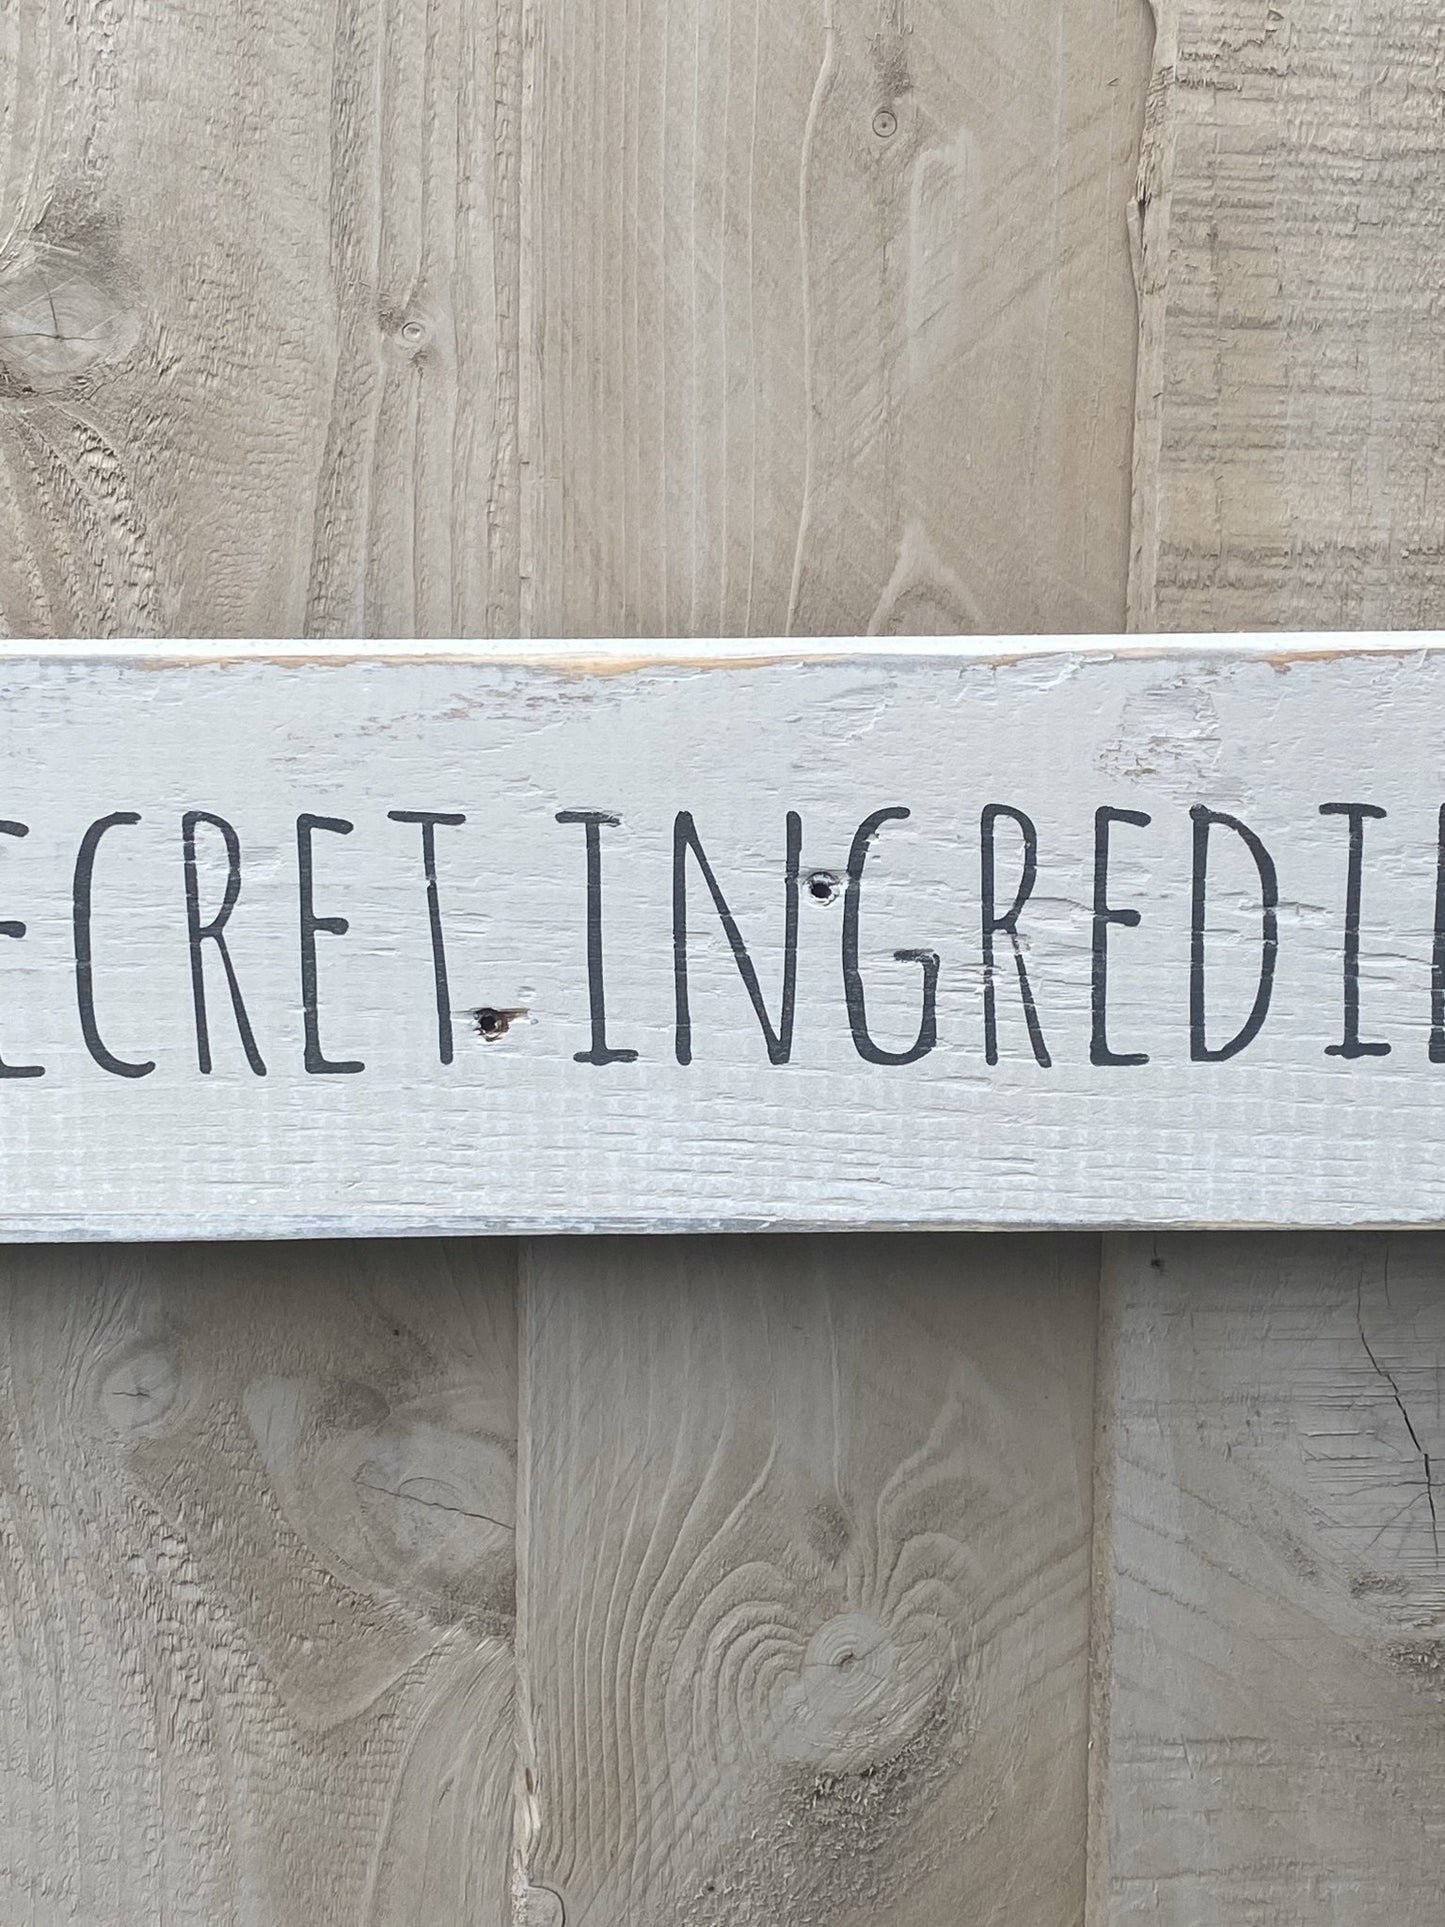 The Secret Ingredient Is Always Love | Long Wood Sign - The Imperfect Wood Company - Long Wood Sign